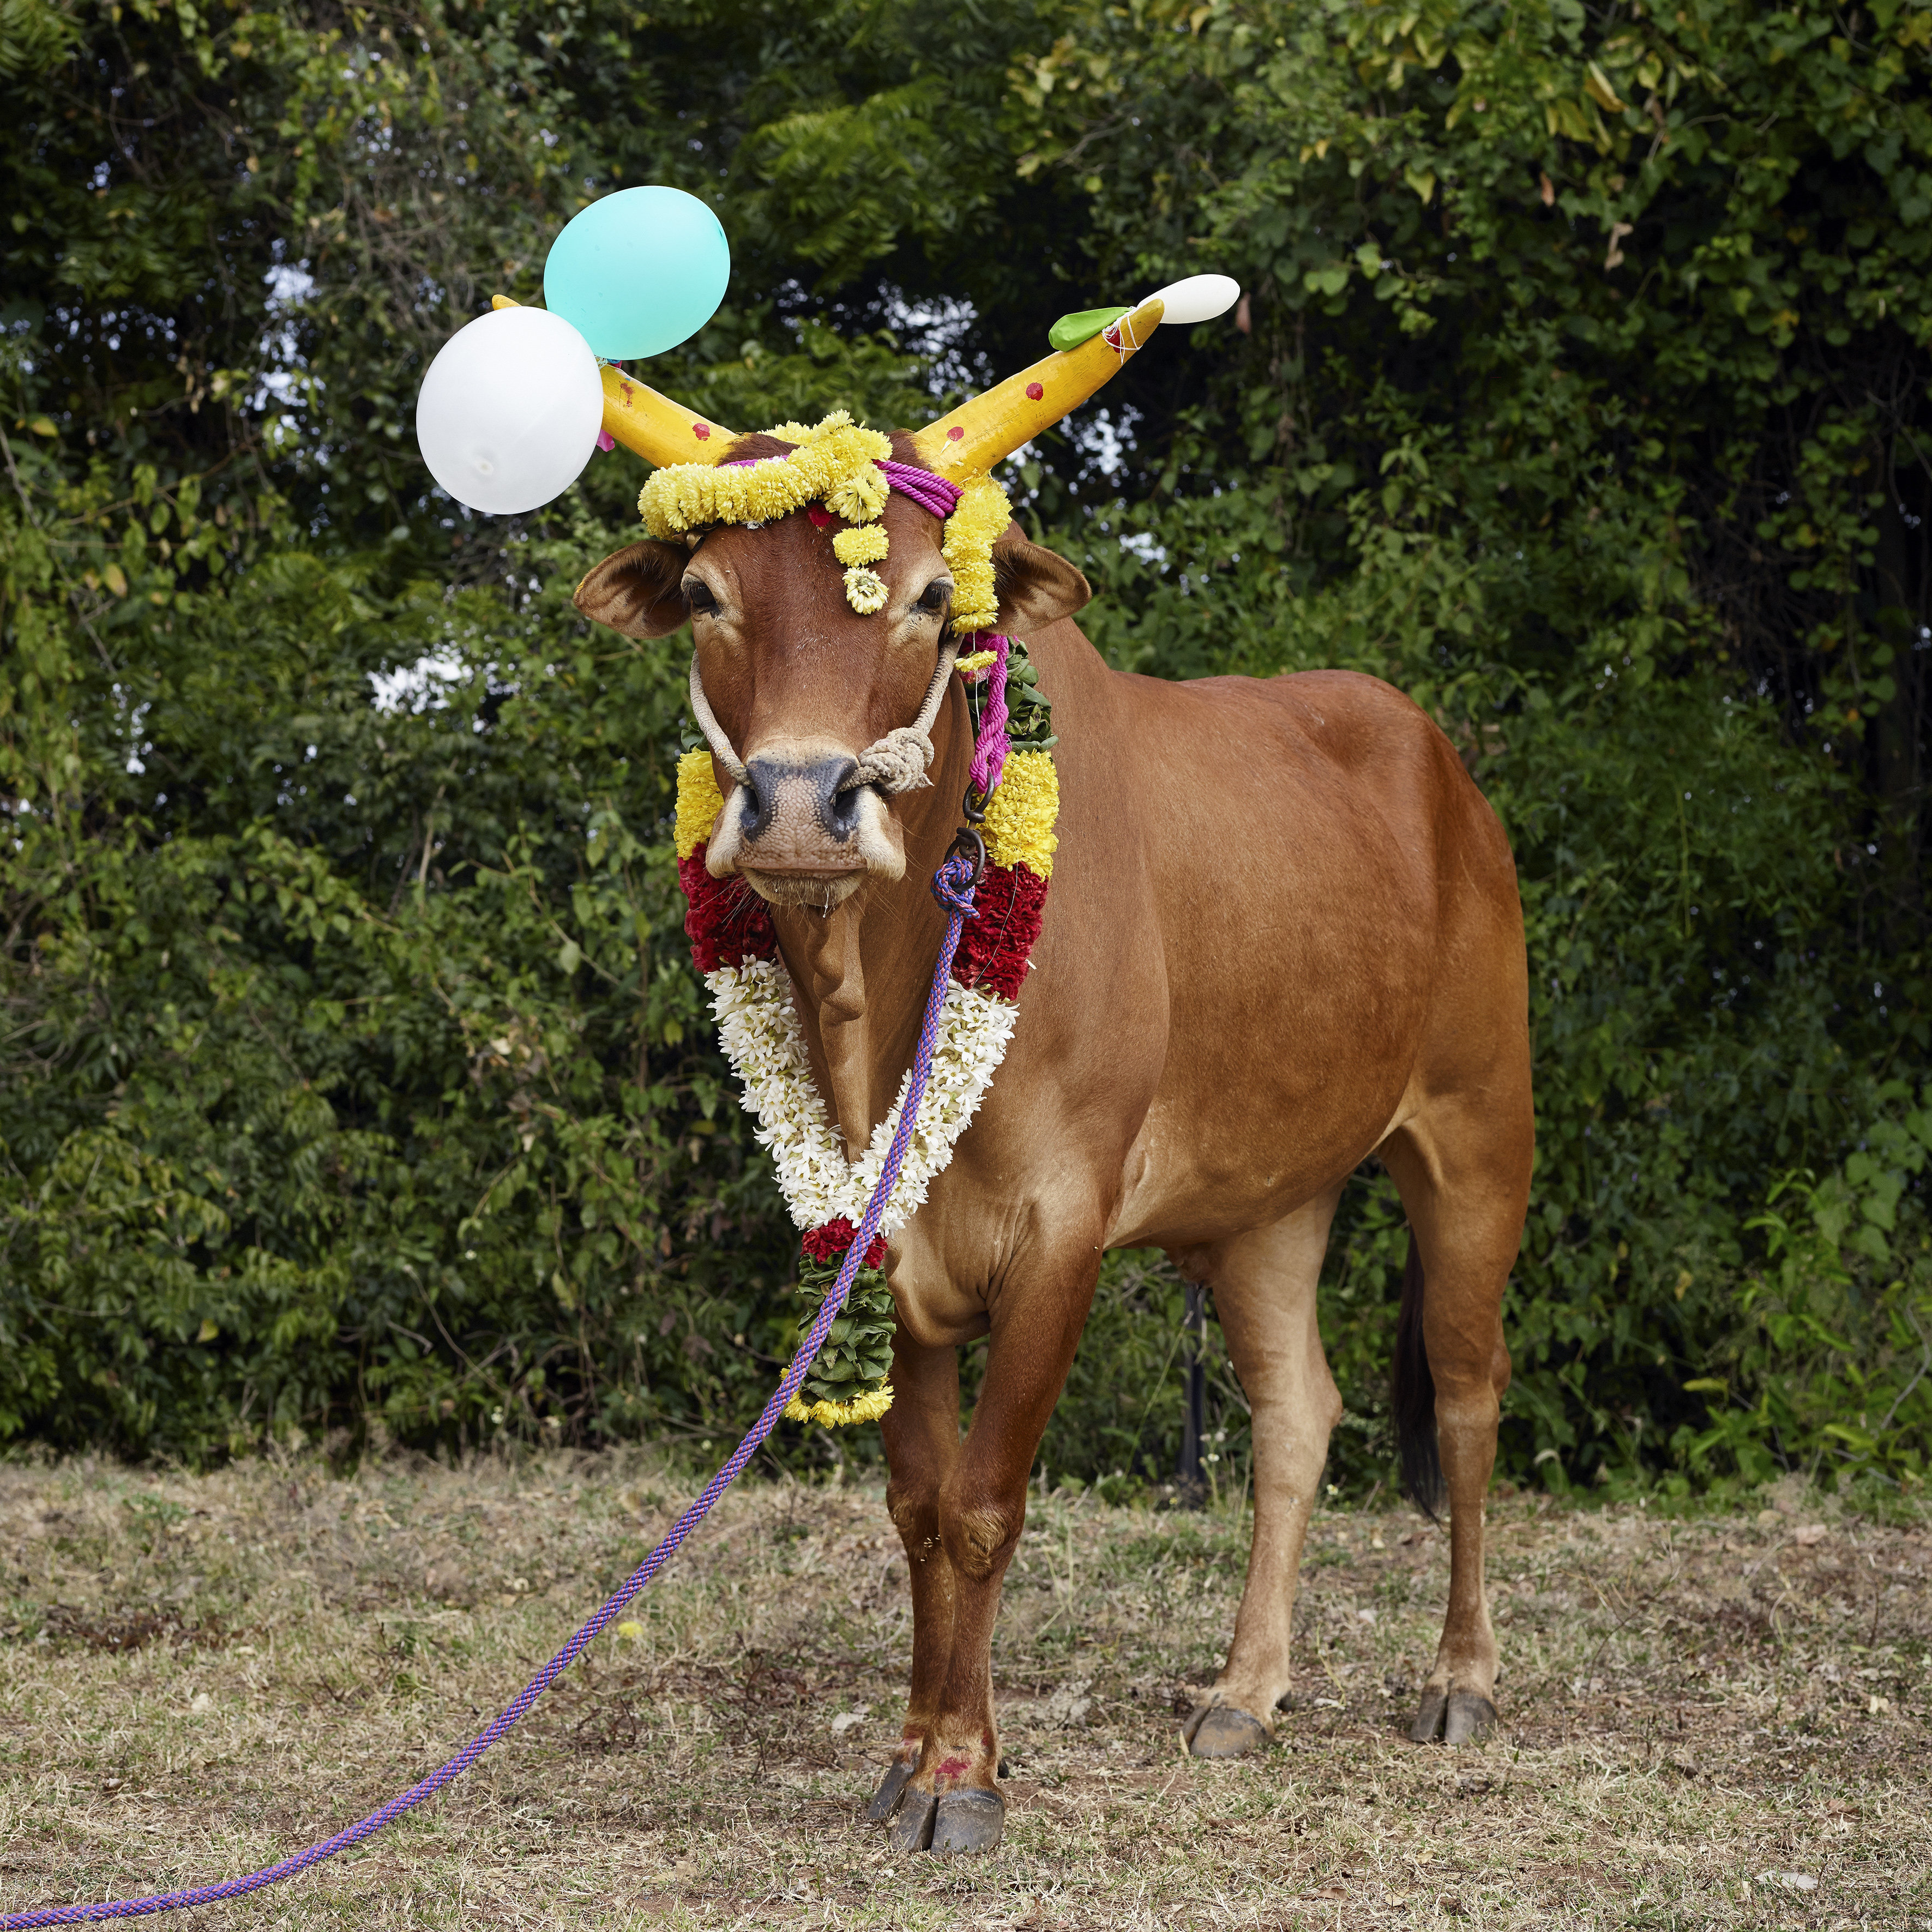 The Incredible Beauty Of Cattle Deemed Sacred Around The World HuffPost Entertainment